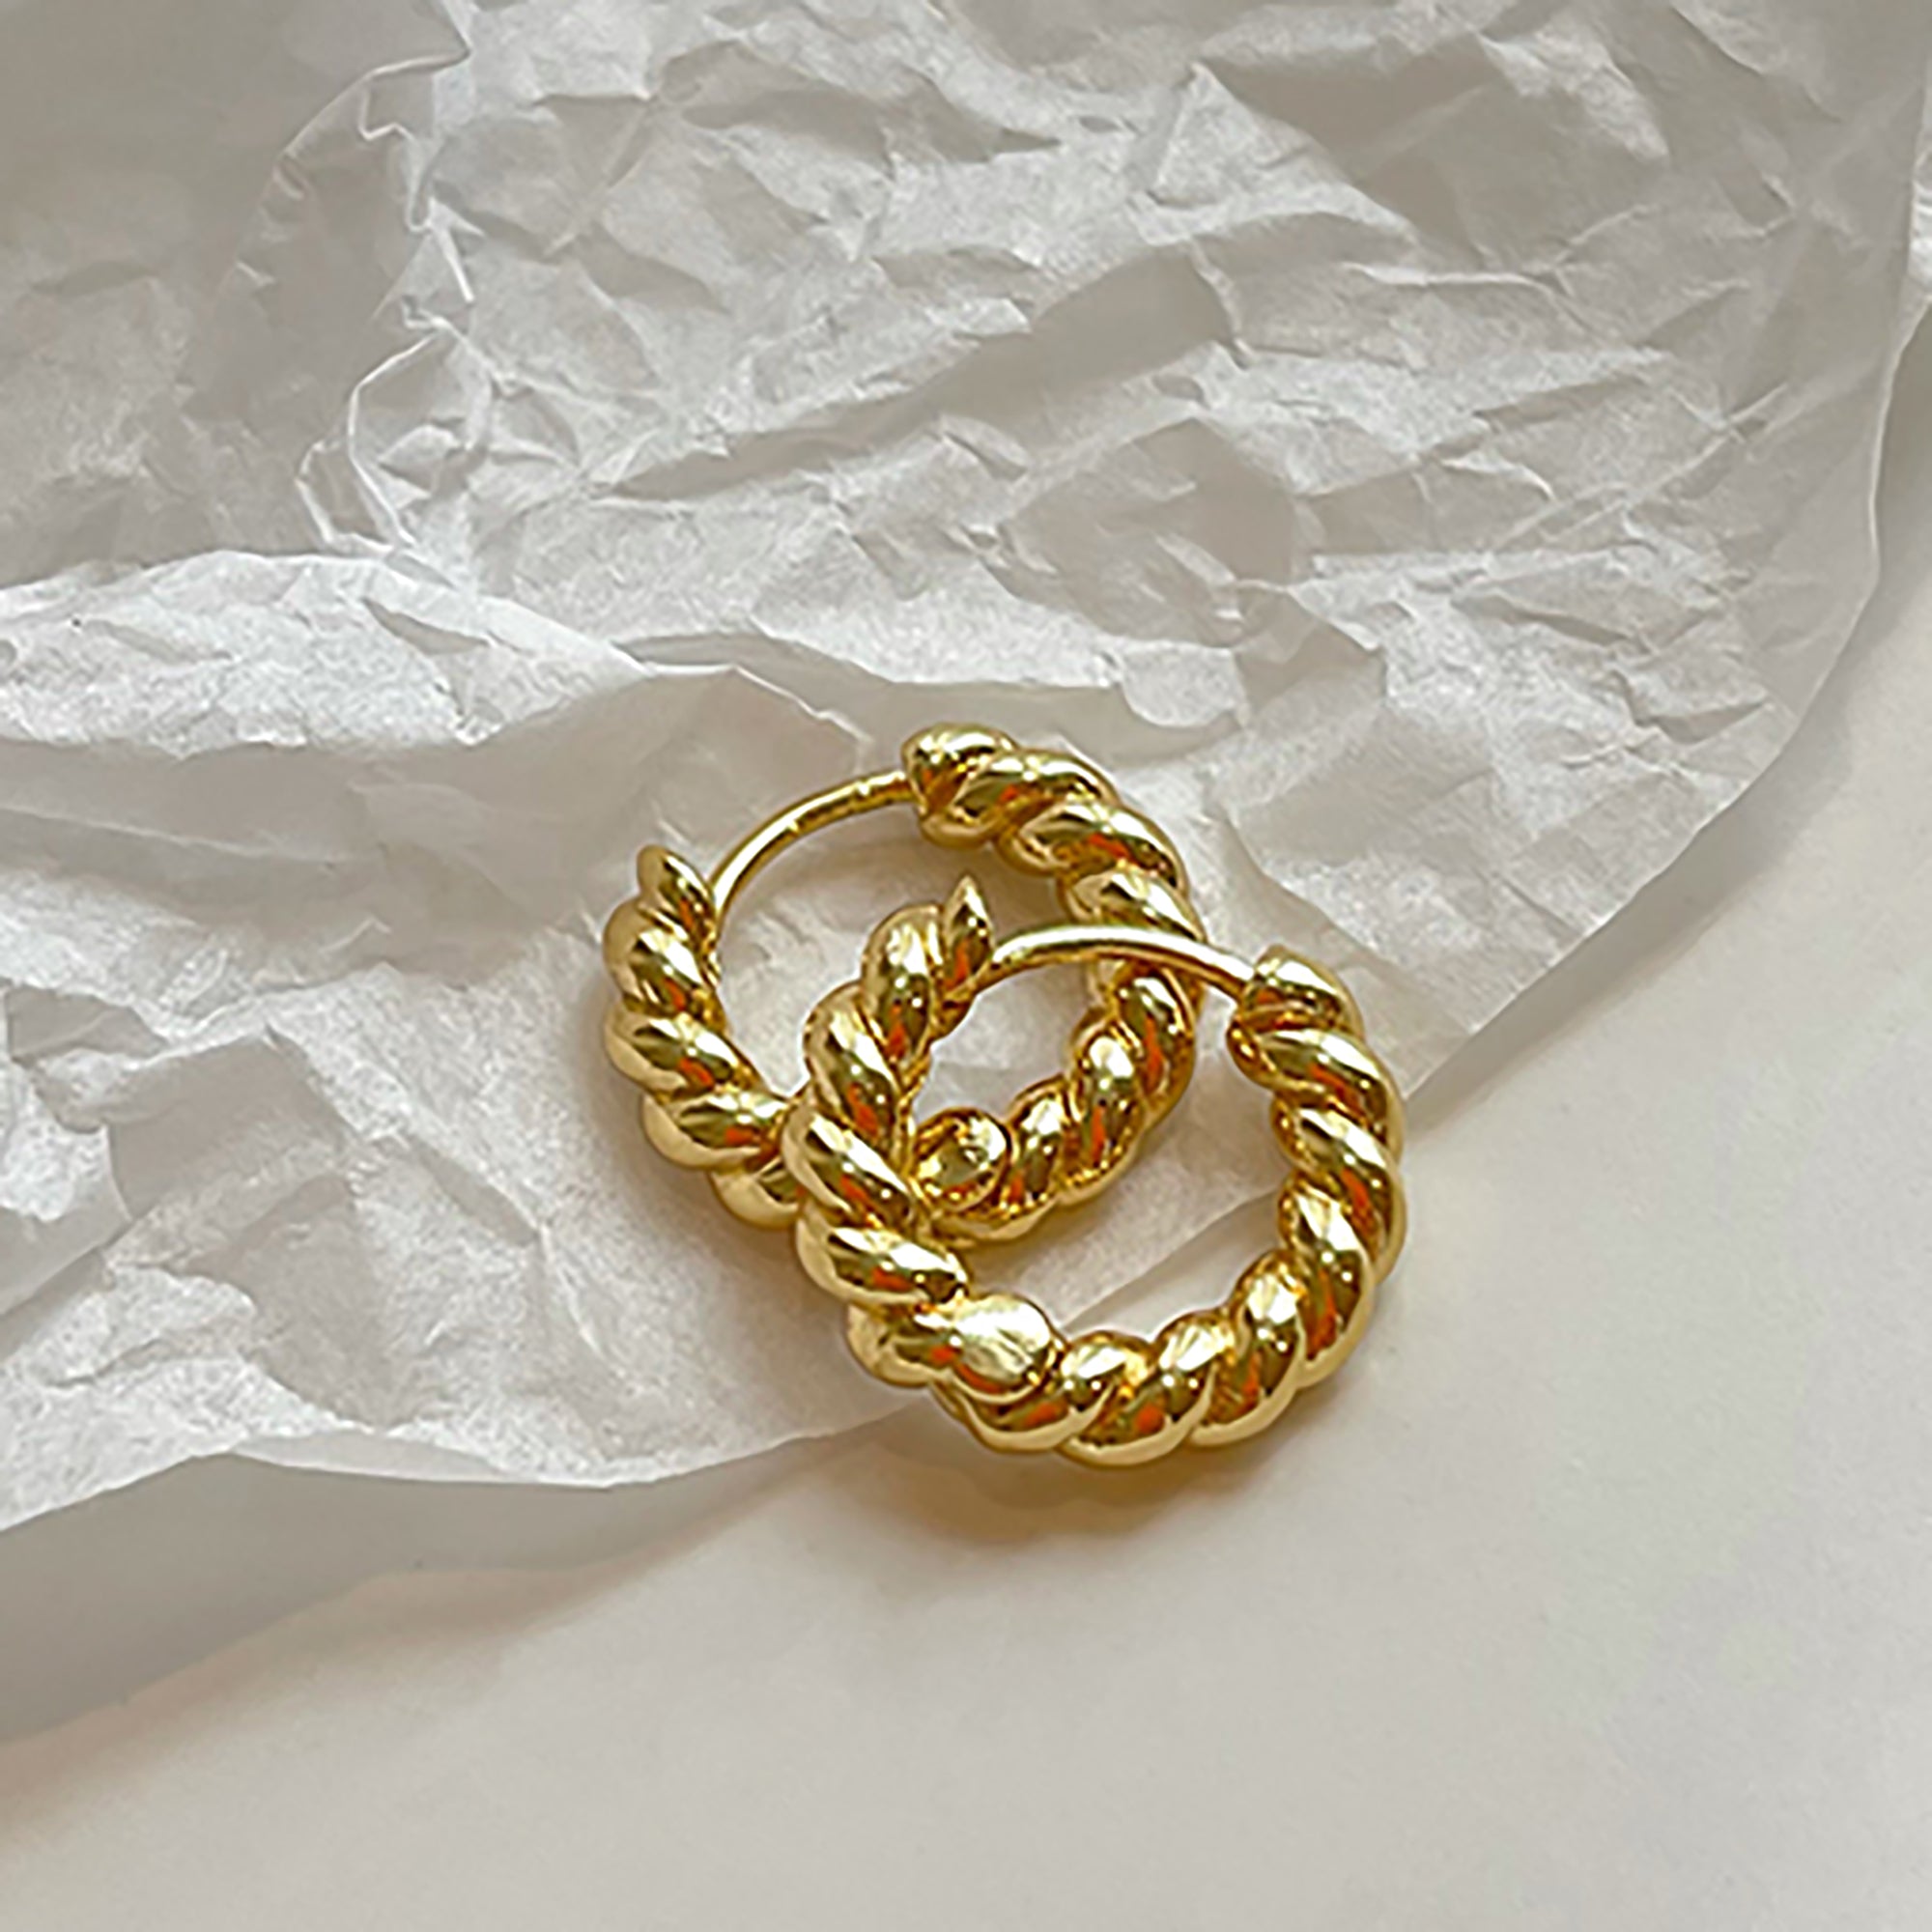 18K Gold Plated Swirl Hoop Earrings Gift wedding influencer styling KOL / Youtuber / Celebrity / Fashion Icon picked